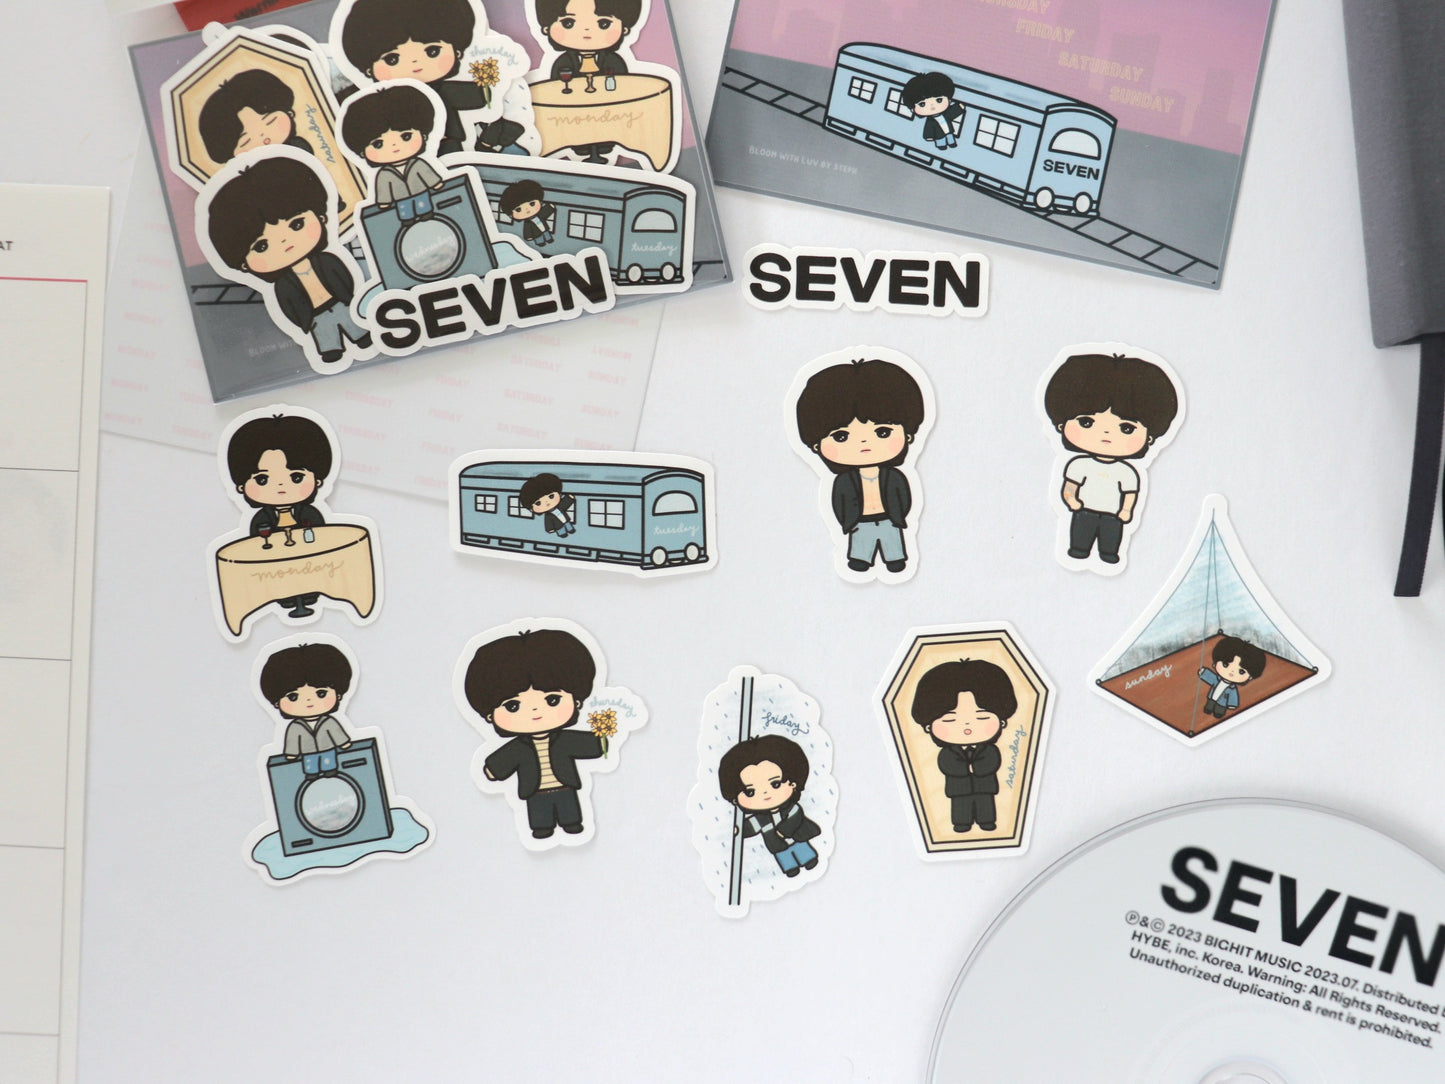 Seven Jungkook Sticker Pack – Bloom With Luv